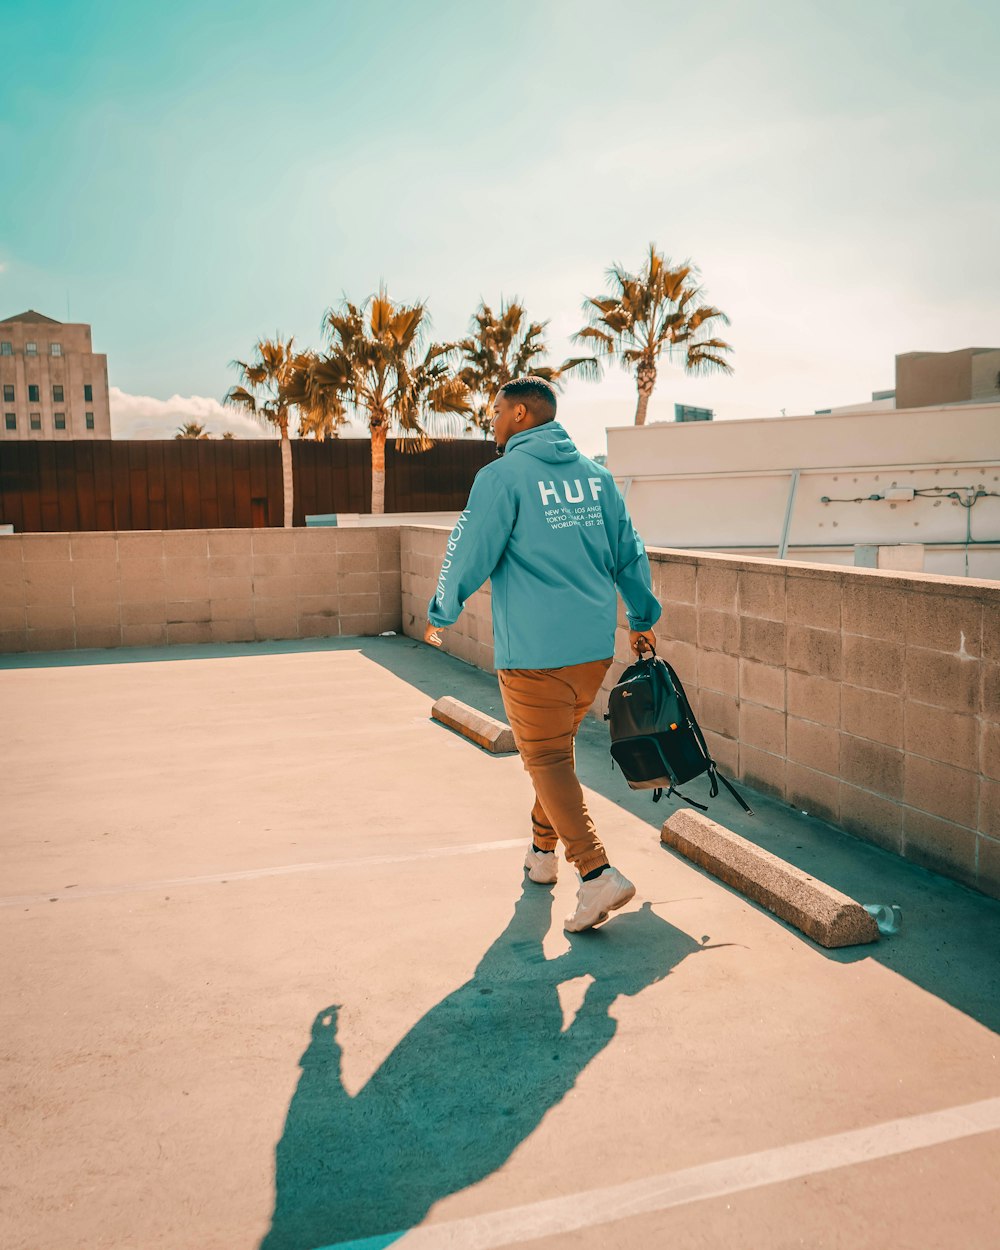 man in blue hoodie and gray shorts standing on skateboard during daytime